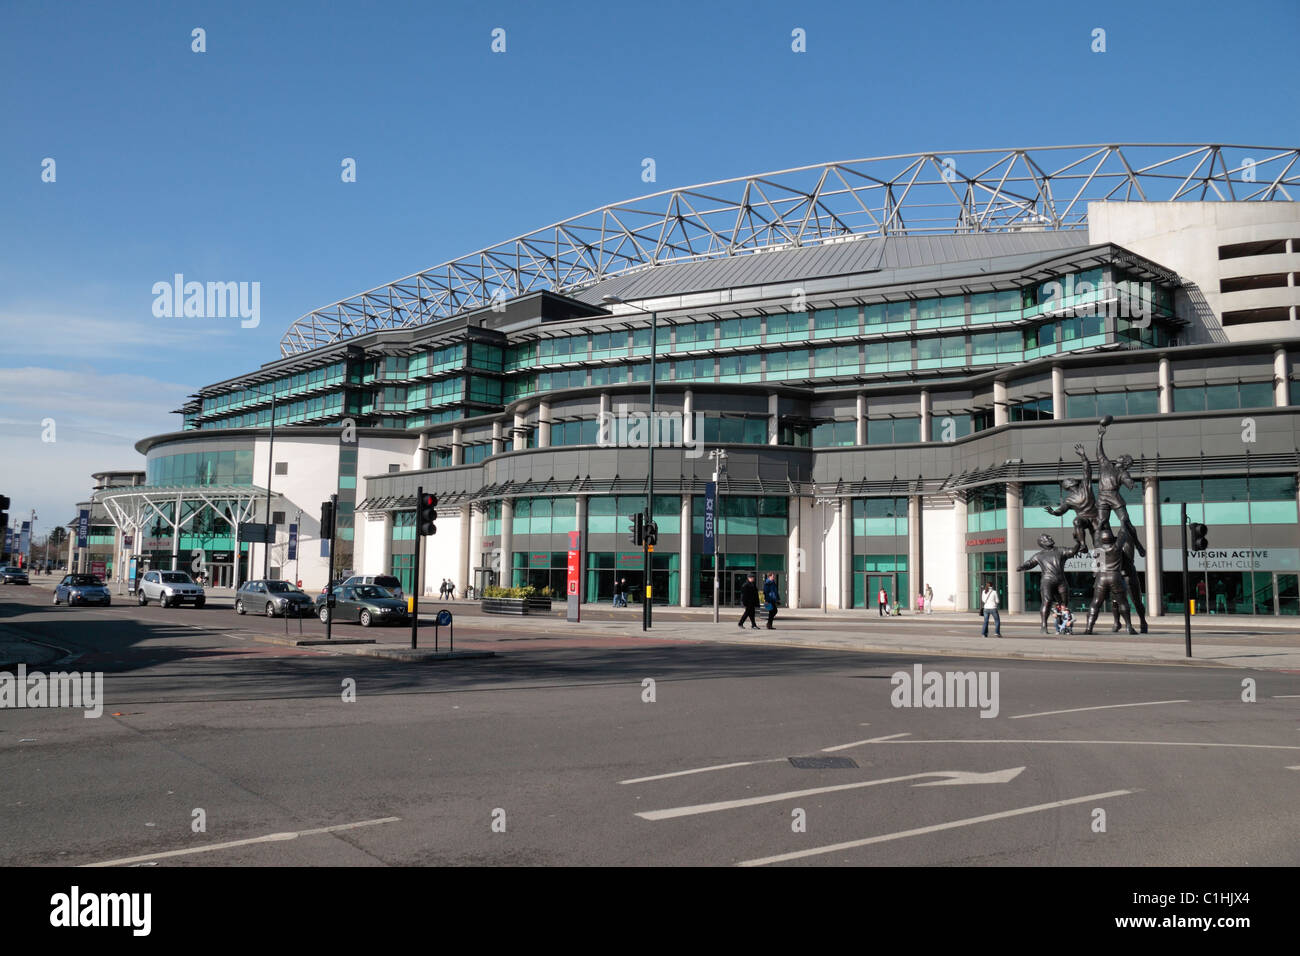 View of the redeveloped south stand of Twickenham Rugby Stadium, London, UK. Stock Photo